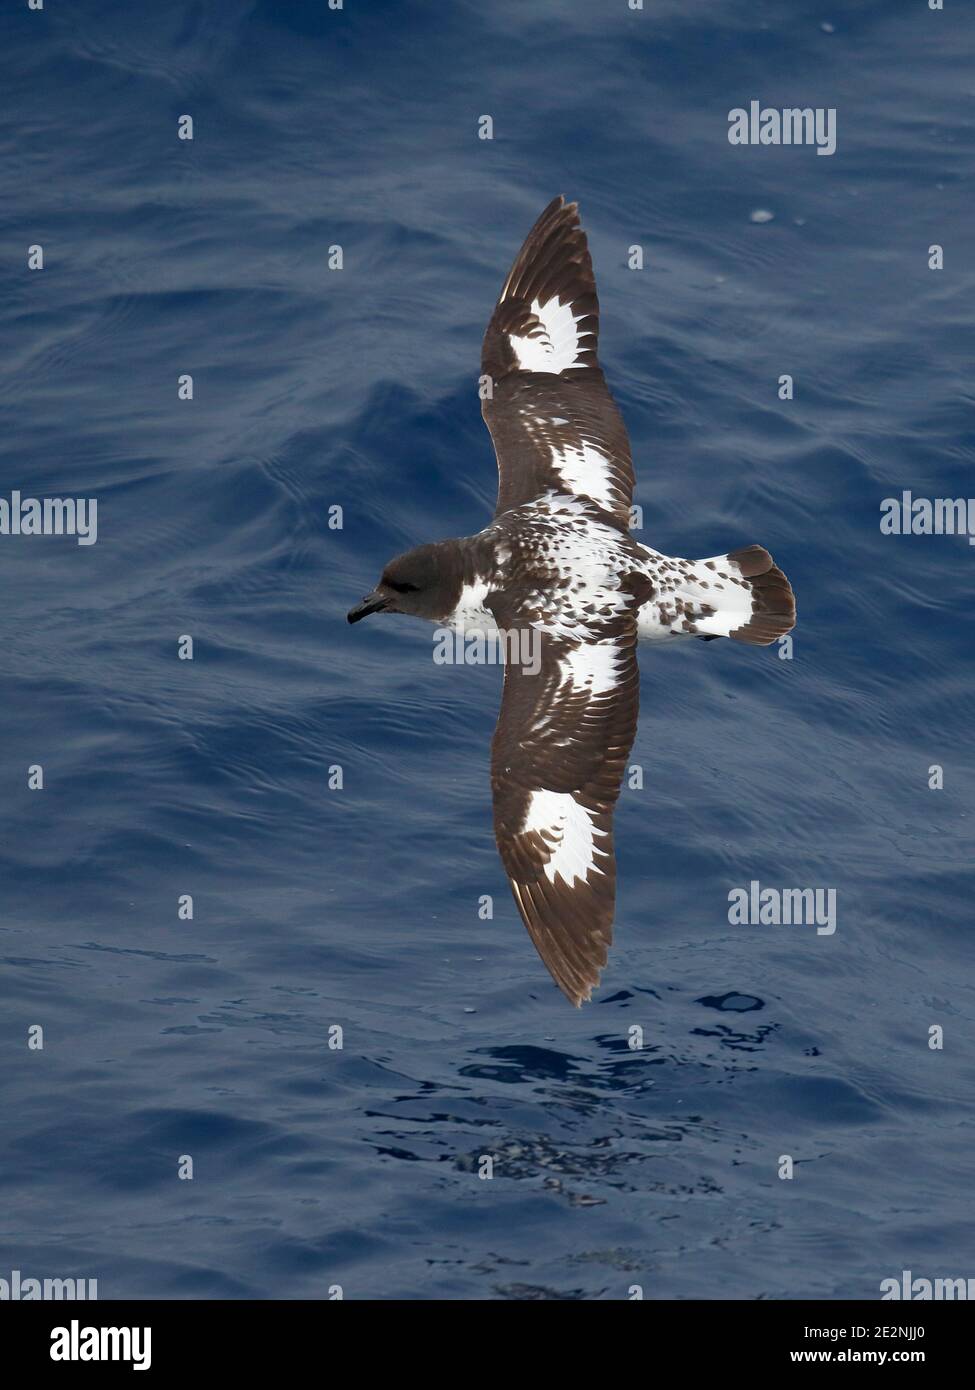 Vertical composition, dorsal view of a Cape Petrel (Daption capense), in flight low over waters of Bransfield Strait, Antarctica 17th Dec 2015 Stock Photo